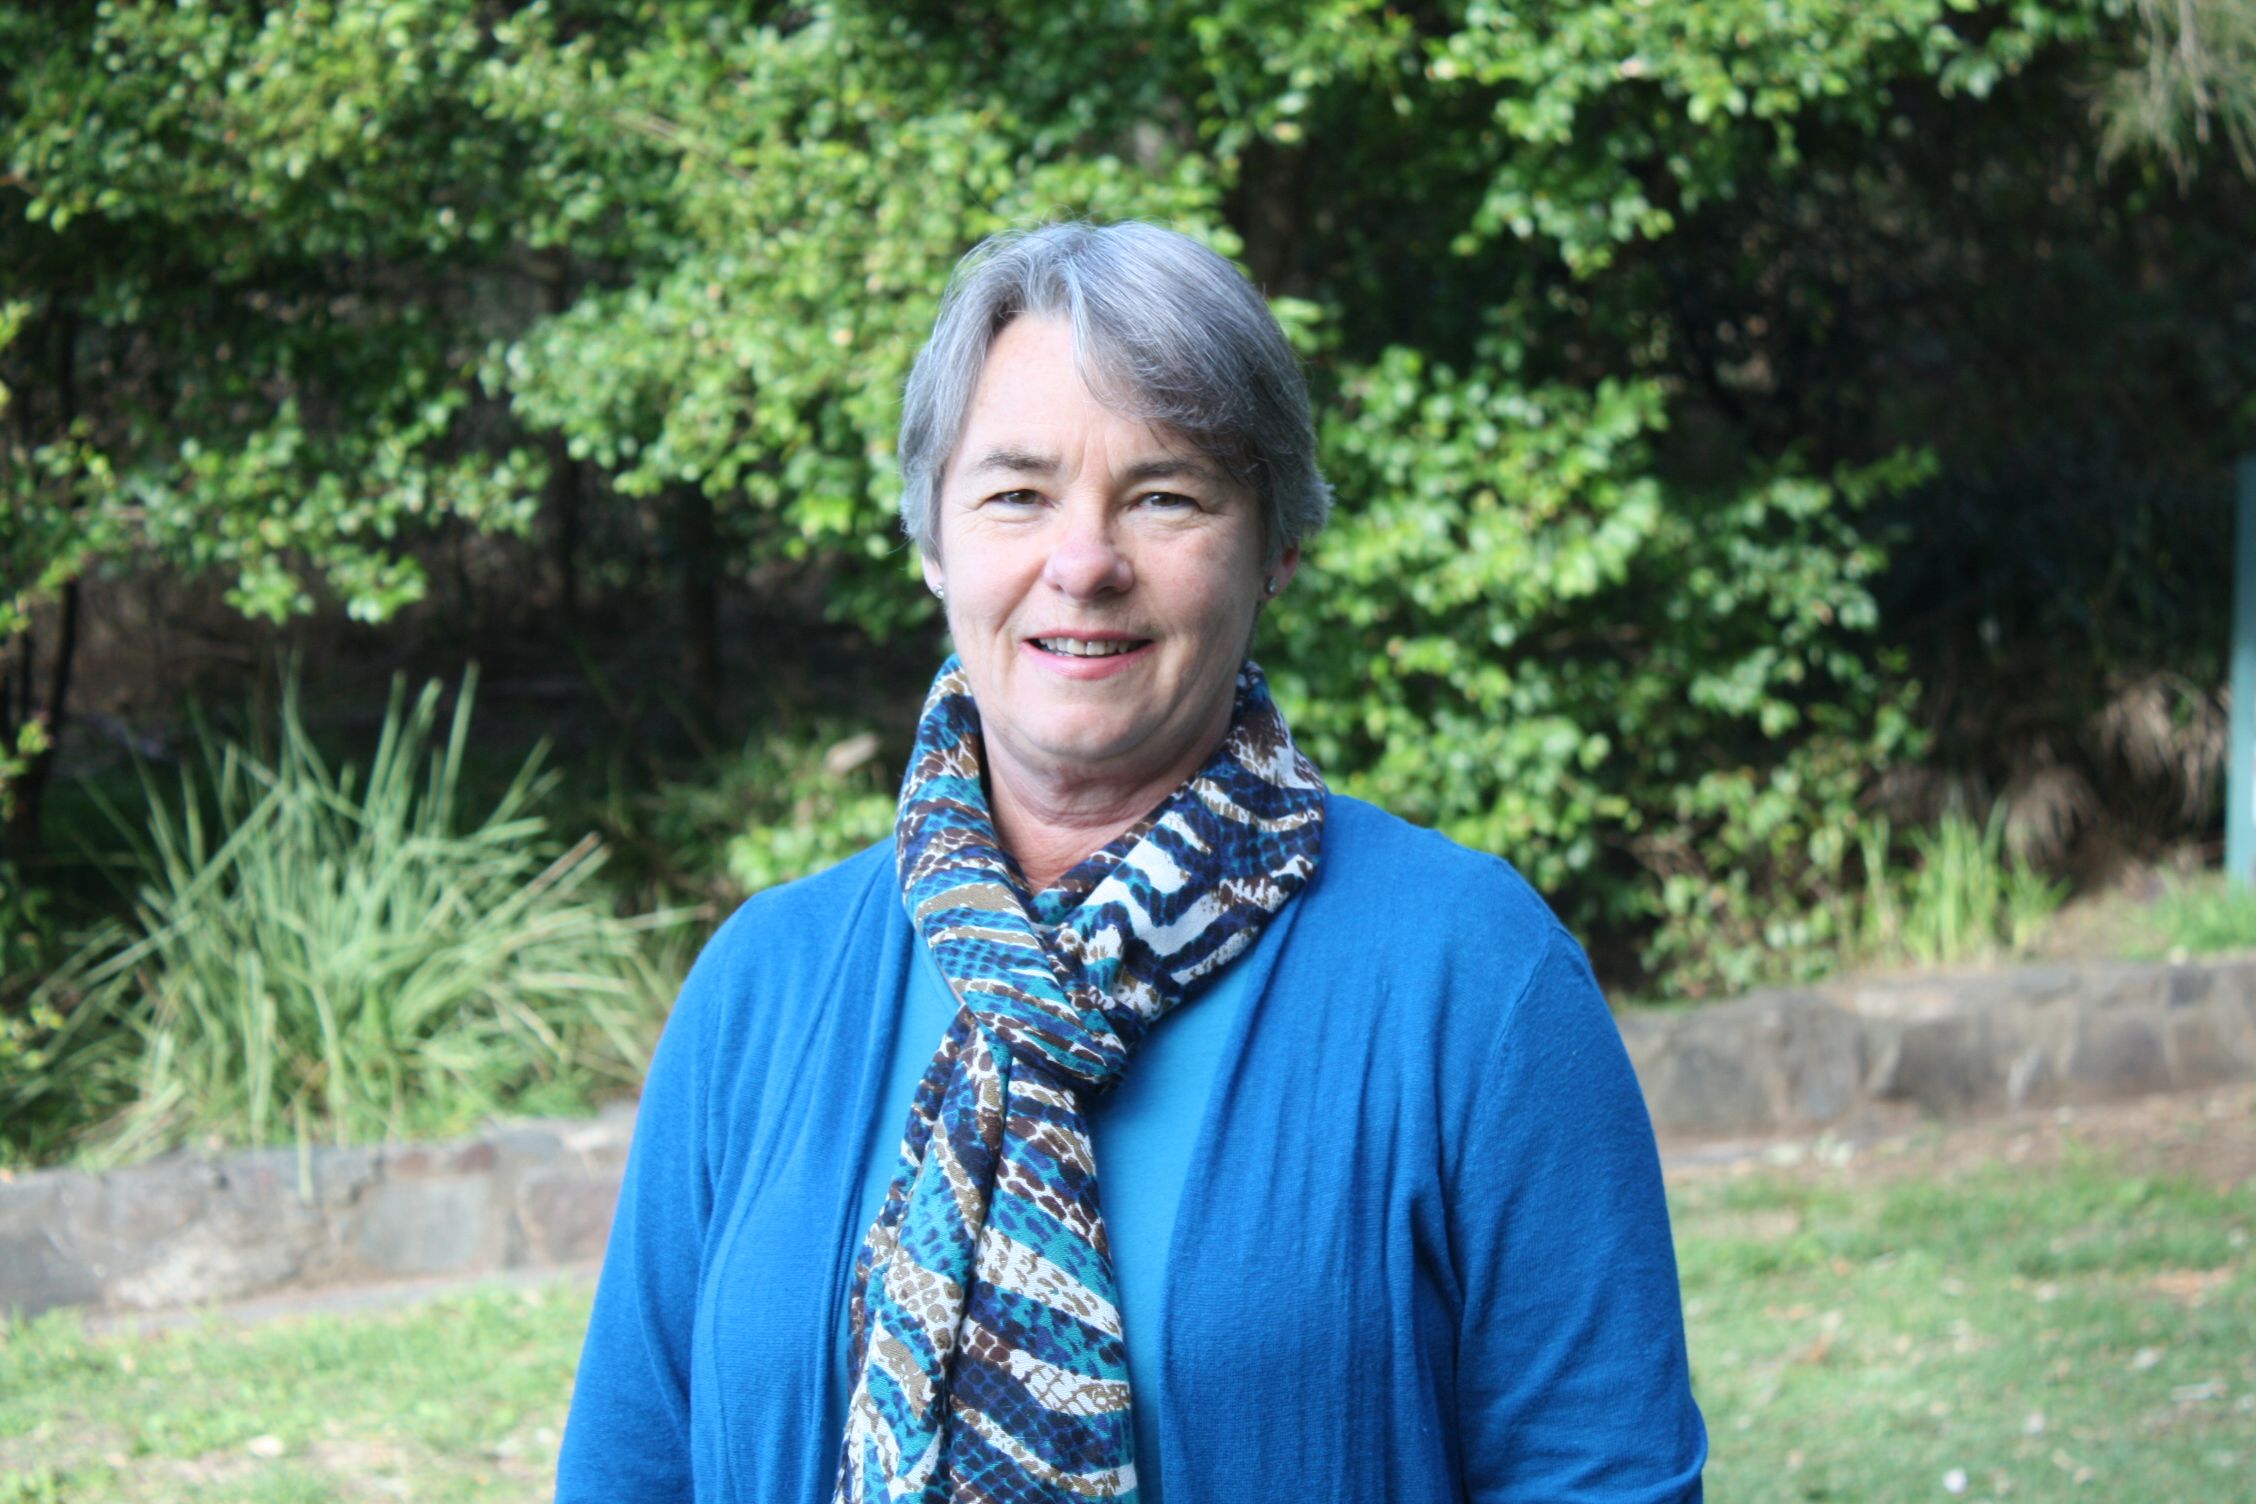 Kathy Rice, Greens Candidate for Kiama Municipal Council